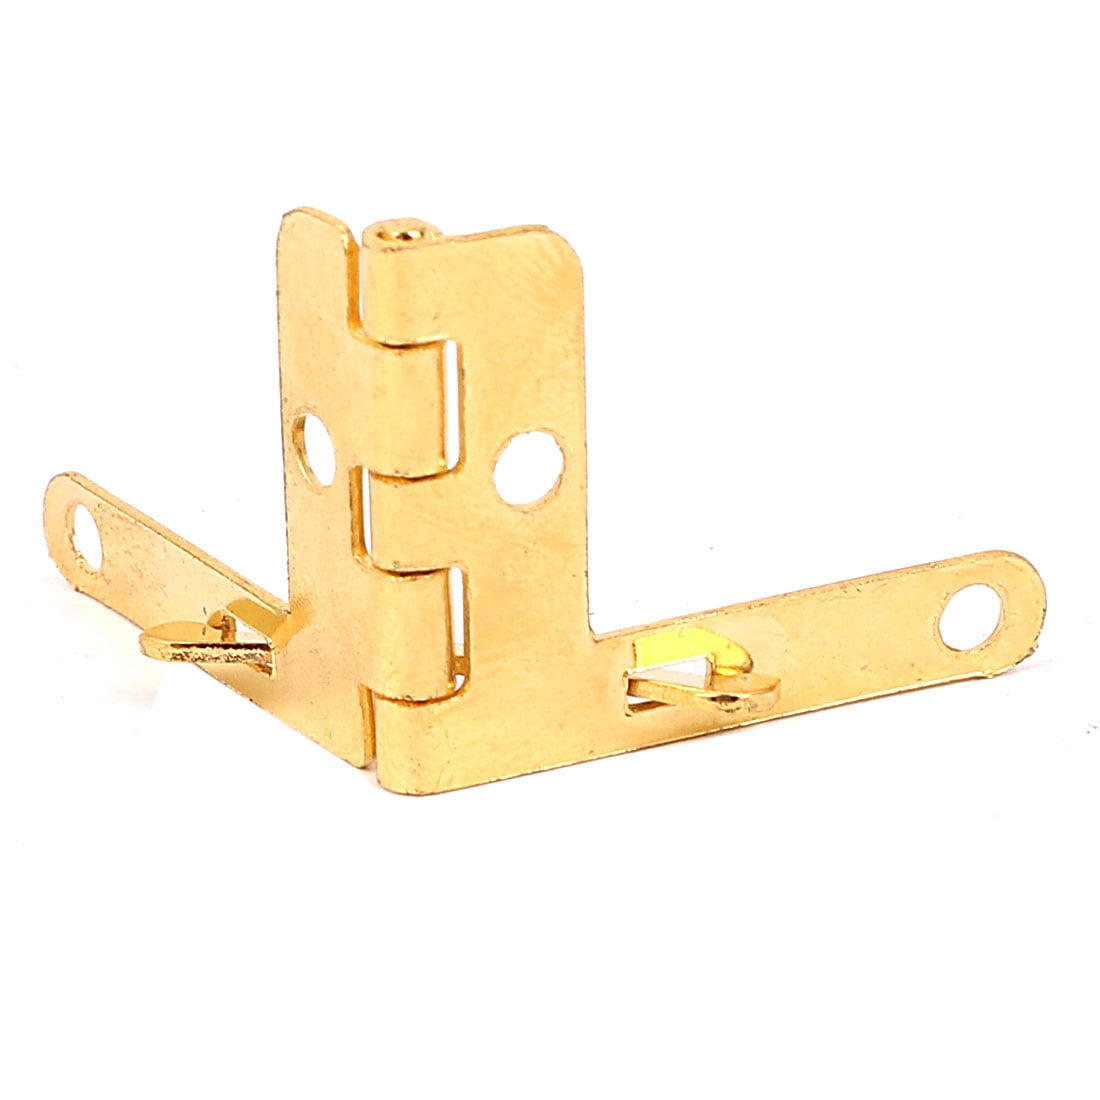 28mmx22mm Quadrant Hinge Gold Tone for Humidor Boxes Wine Cigar Case ...